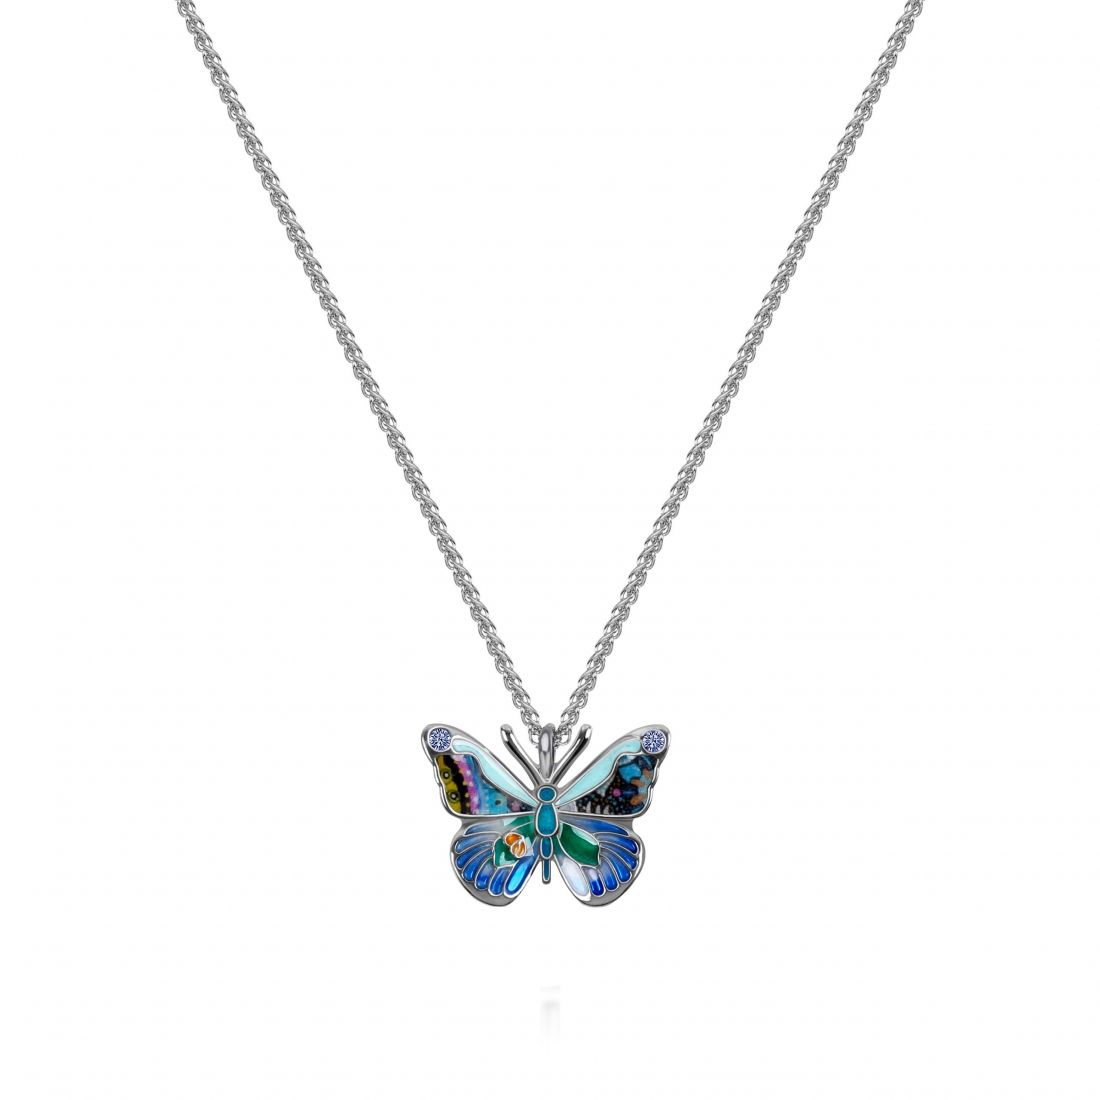 Liv Oliver - Collier 'Butterfly' pour Femmes